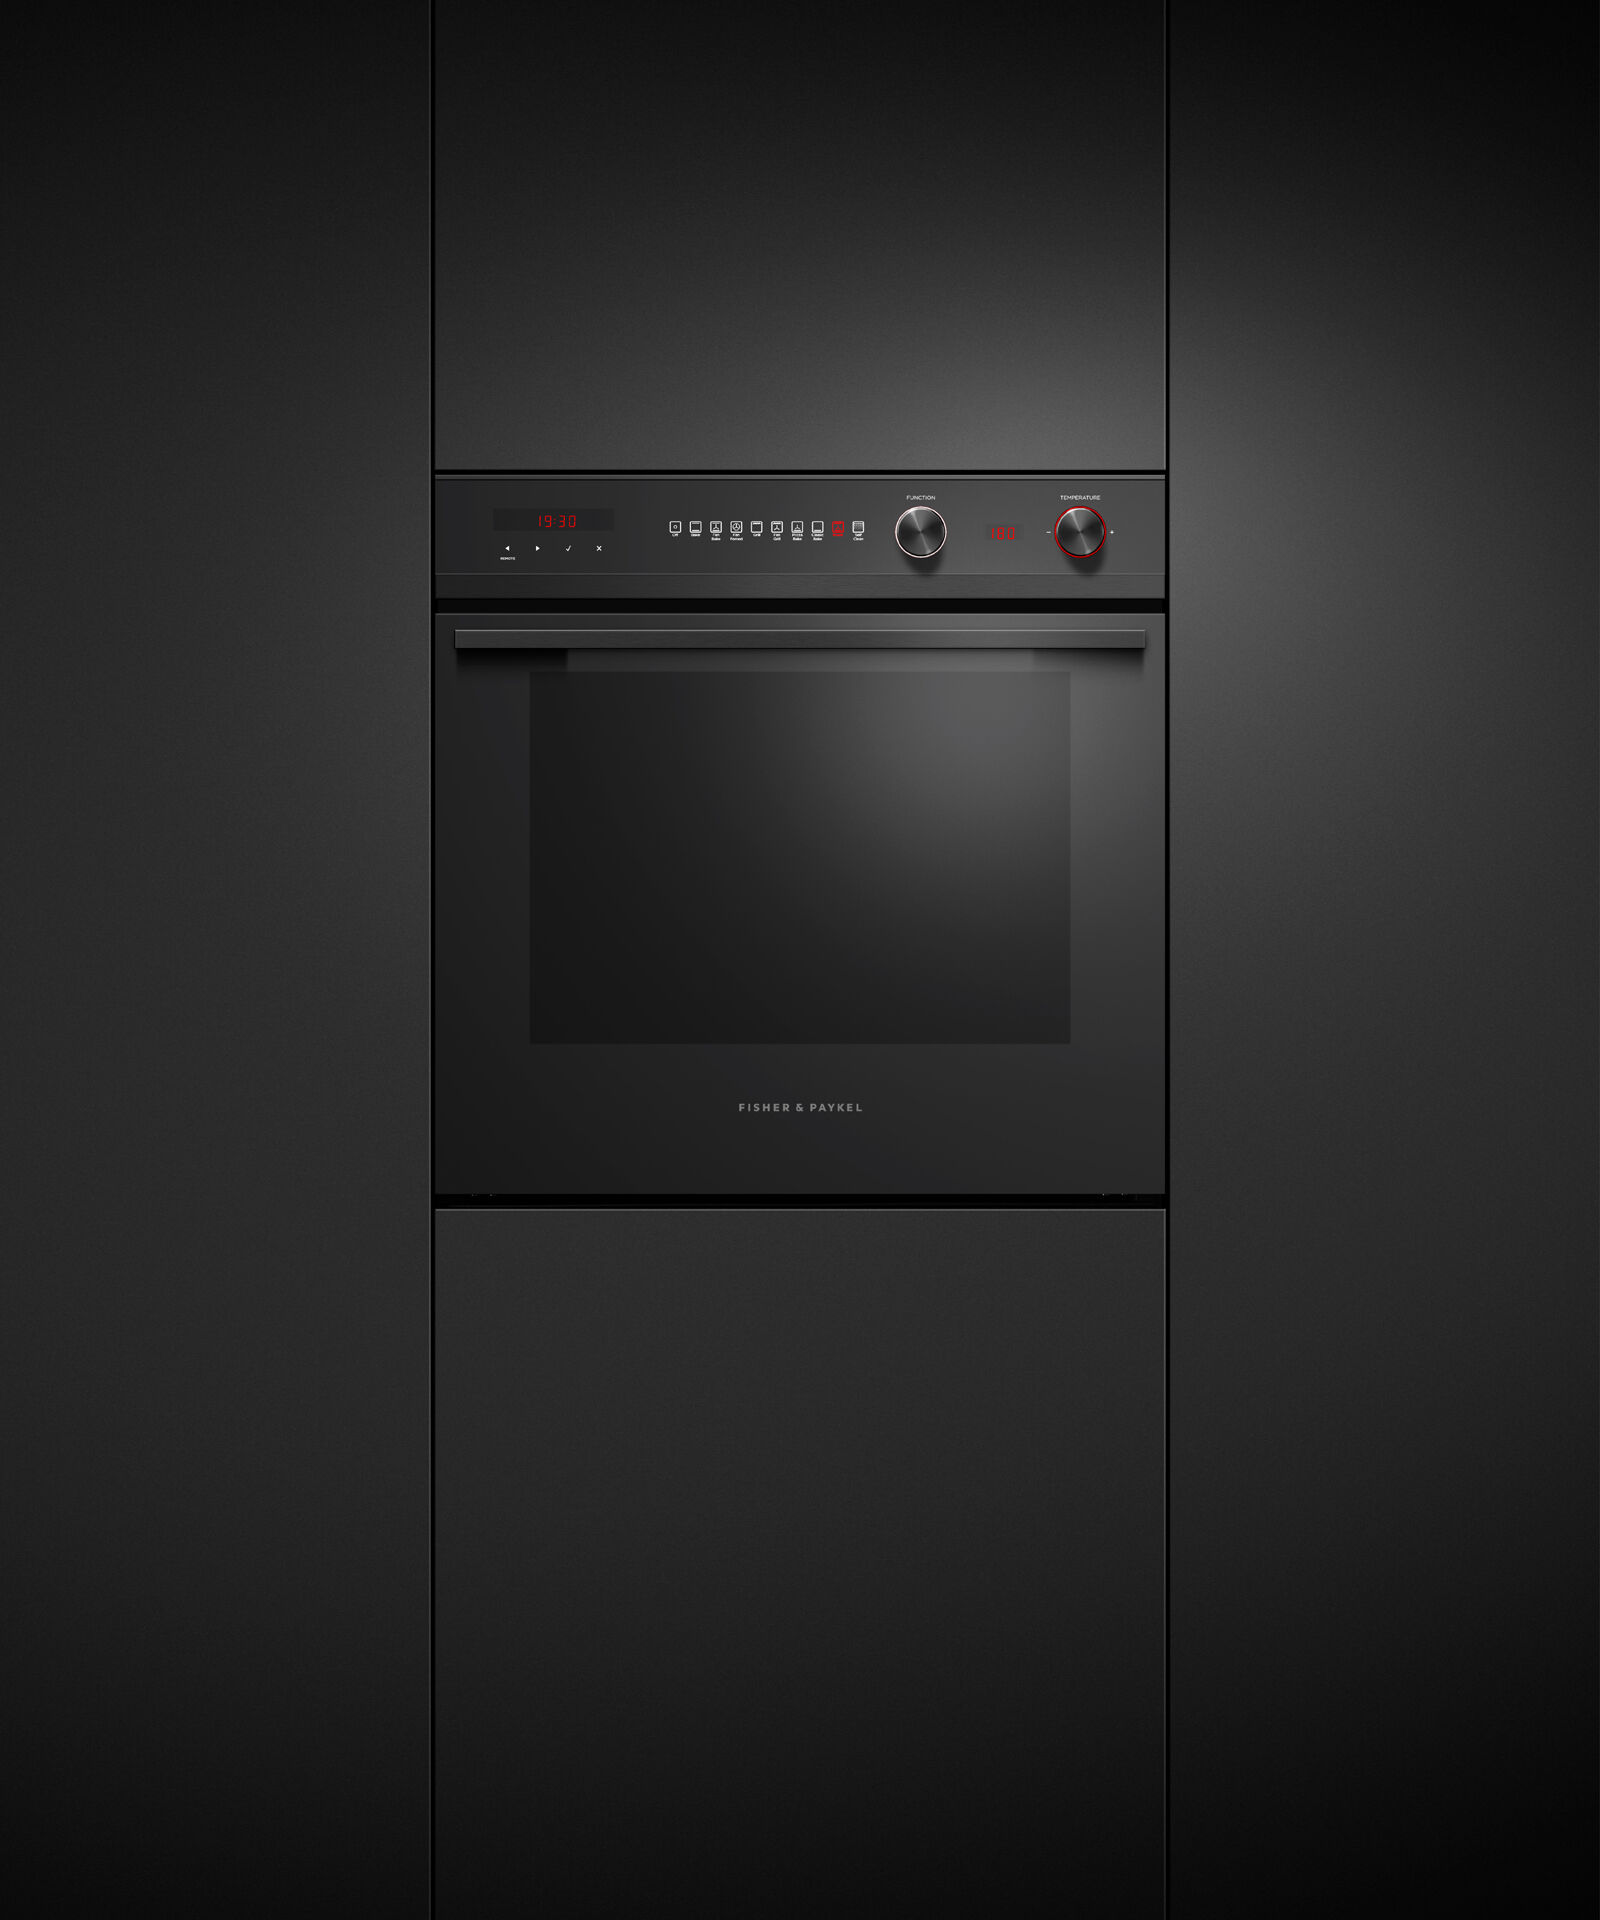 Oven, 60cm, 9 Function, Self-cleaning gallery image 3.0